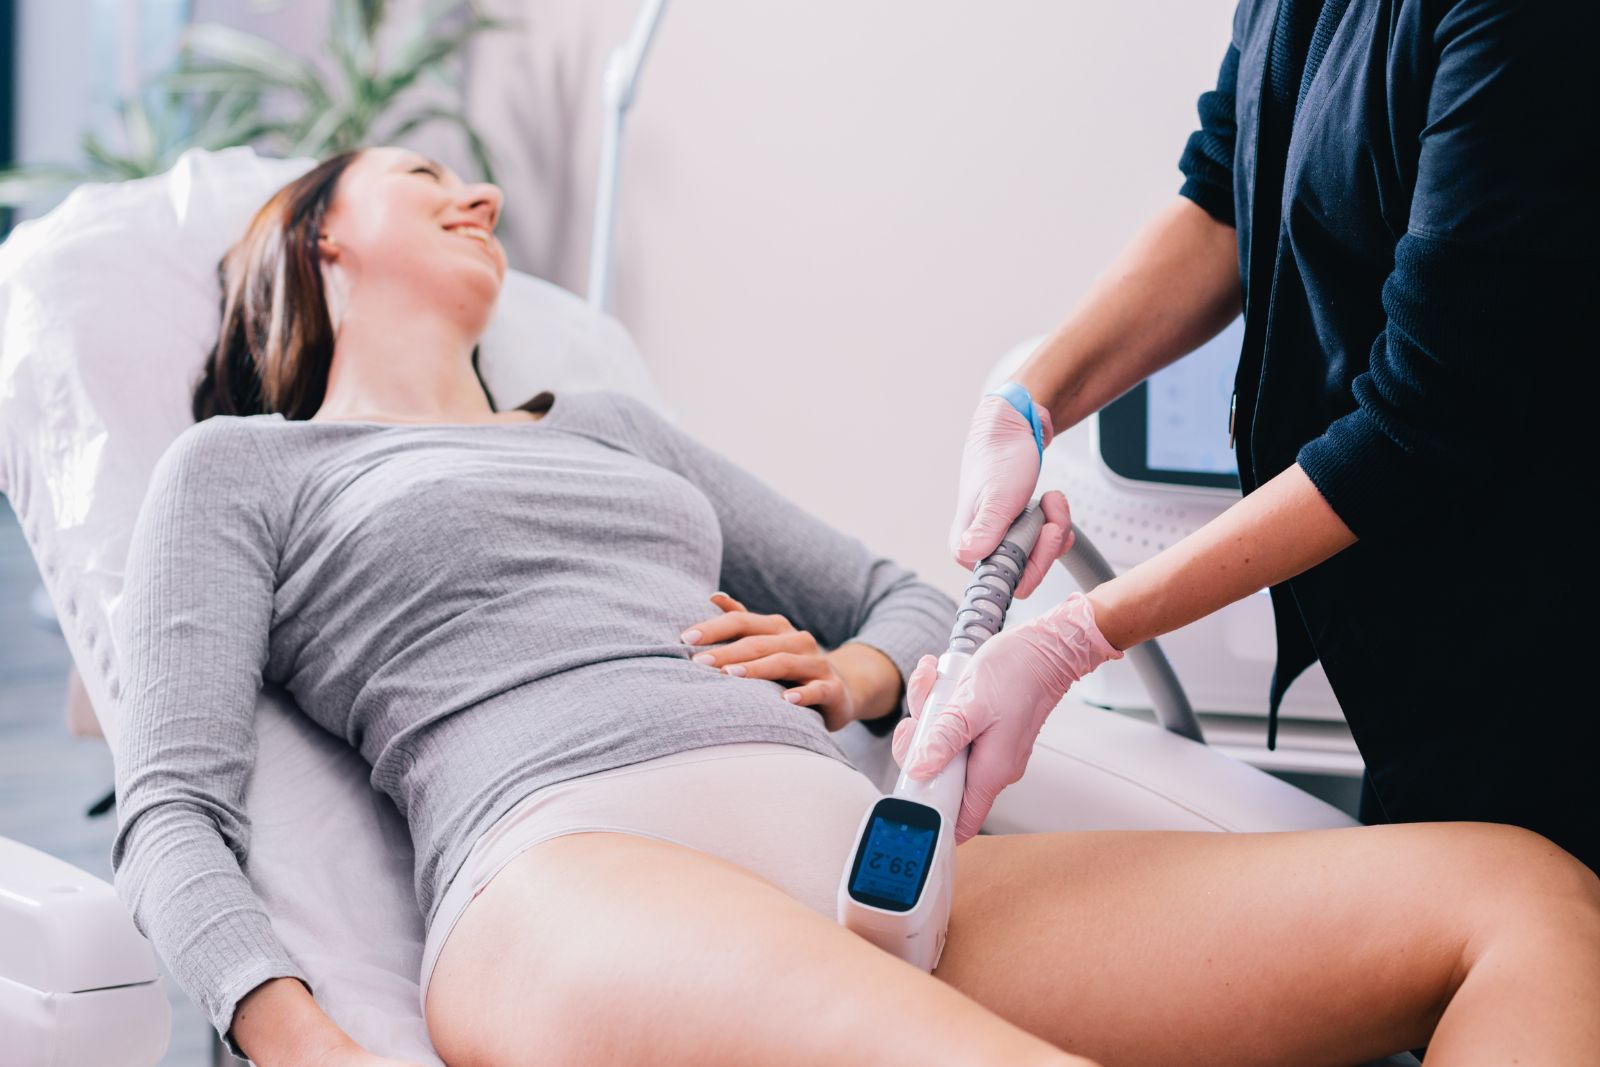 Woman getting a laser bikini area hair removal procedure by a professional beautician in a beauty salon